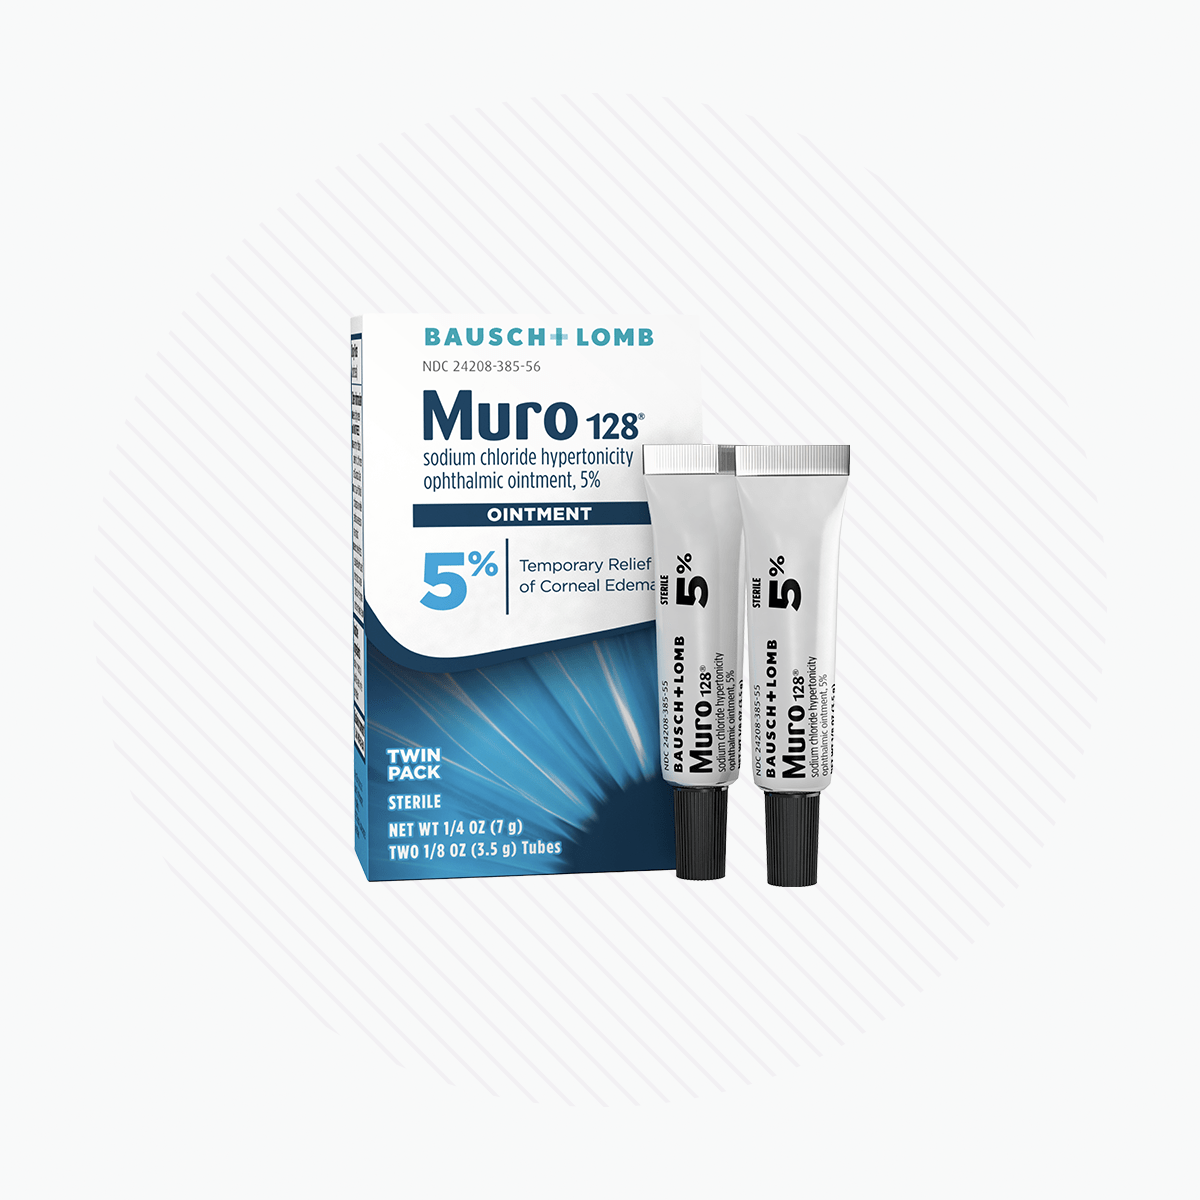 Muro 128 Sodium Chloride Ointment Twin Pack, Temporary Relief for Corneal Edema, 5% Ointment, 1/8 Fl Oz (3.5 g) Twin Pack - Dryeye Rescue